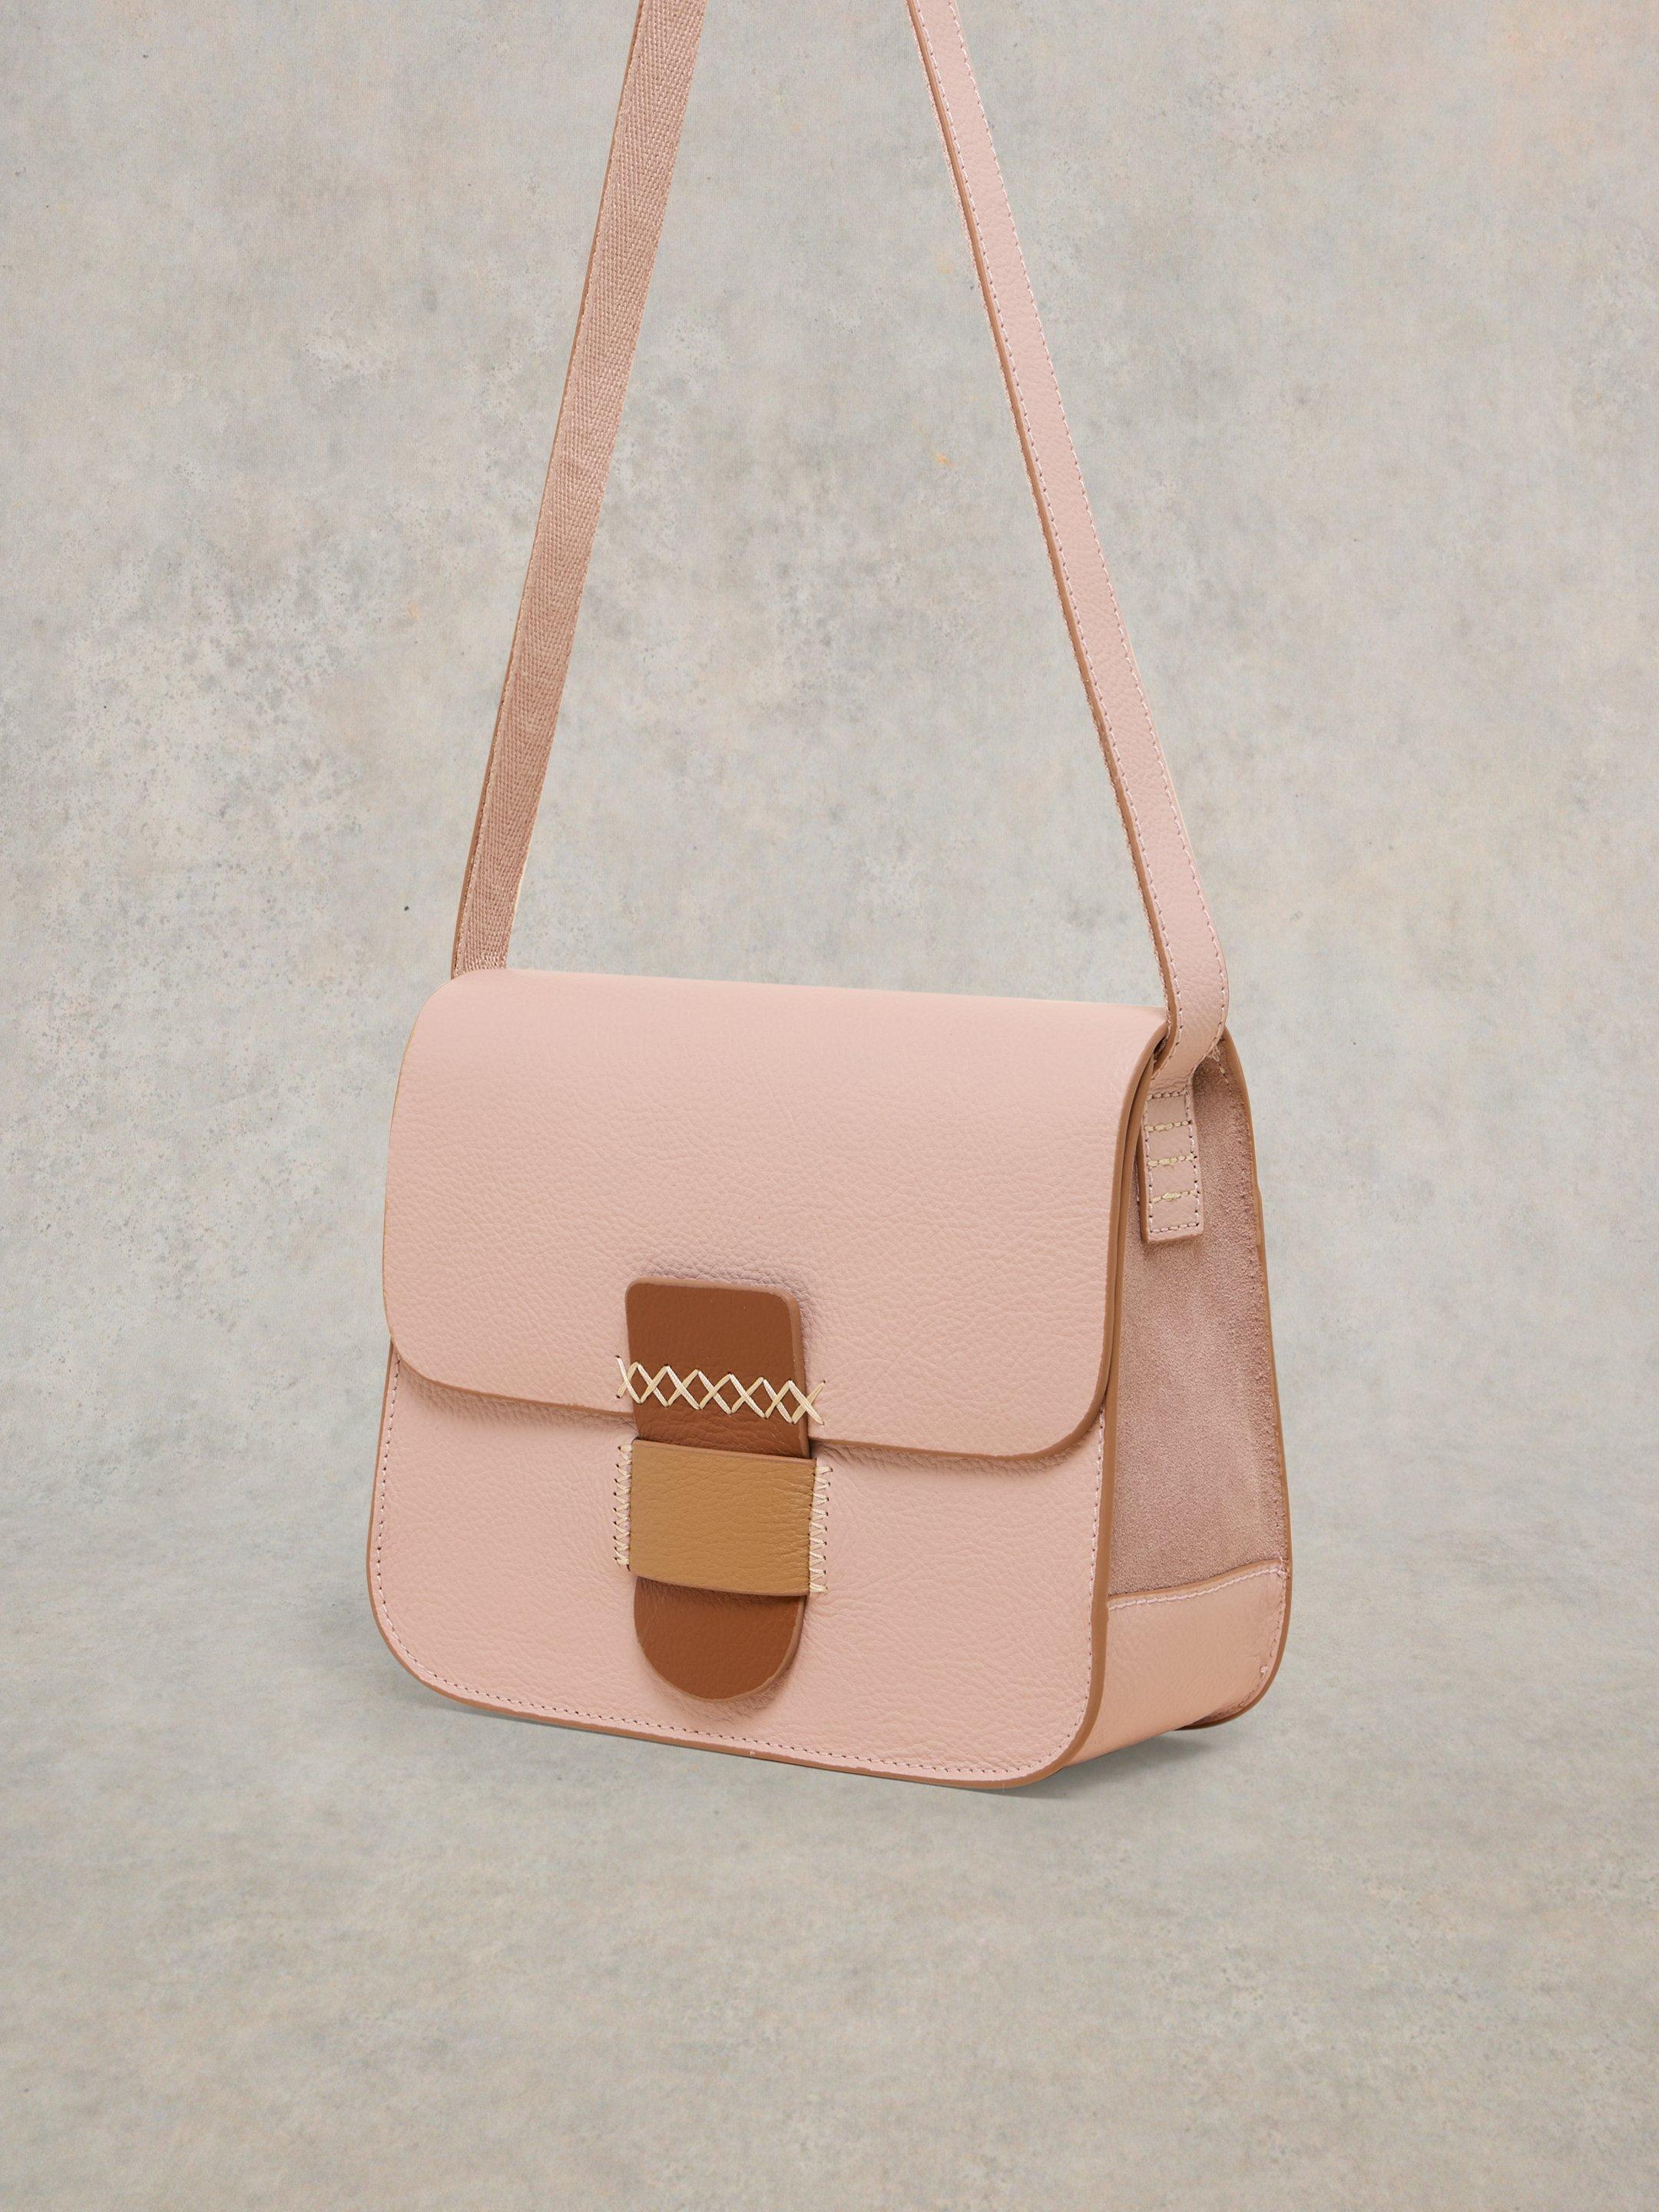 Evie Leather Satchel in LGT PINK - FLAT FRONT